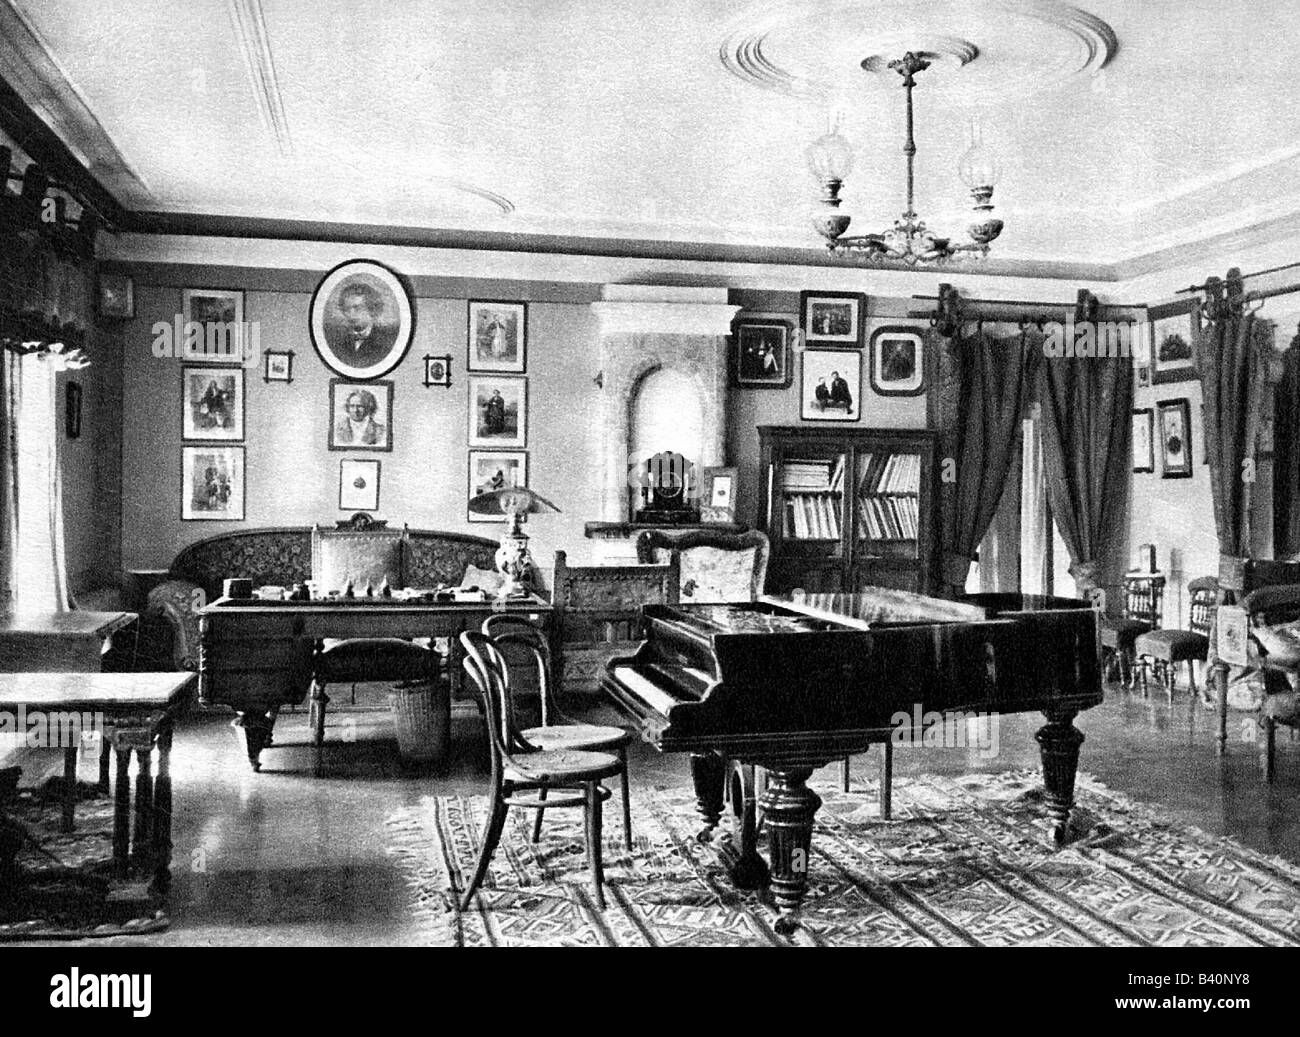 Tchaikovsky, Pyotr Ilyich, 7.5.1840 - 6.11.1893, Russian composer, his house in Klin near Moscow, interior view, , Stock Photo